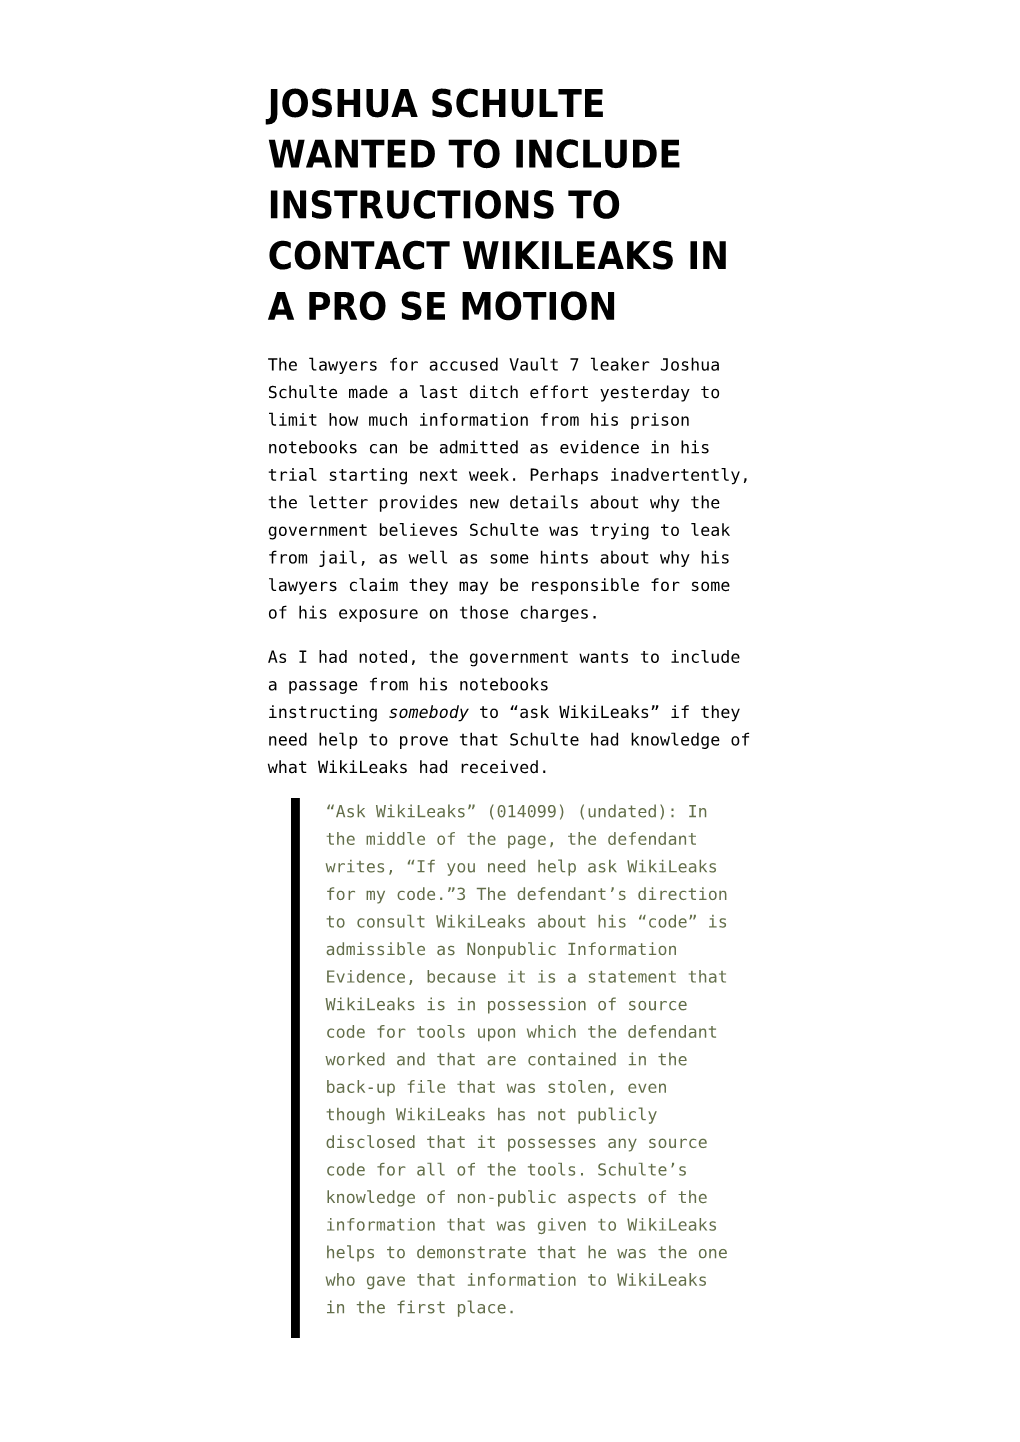 Joshua Schulte Wanted to Include Instructions to Contact Wikileaks in a Pro Se Motion